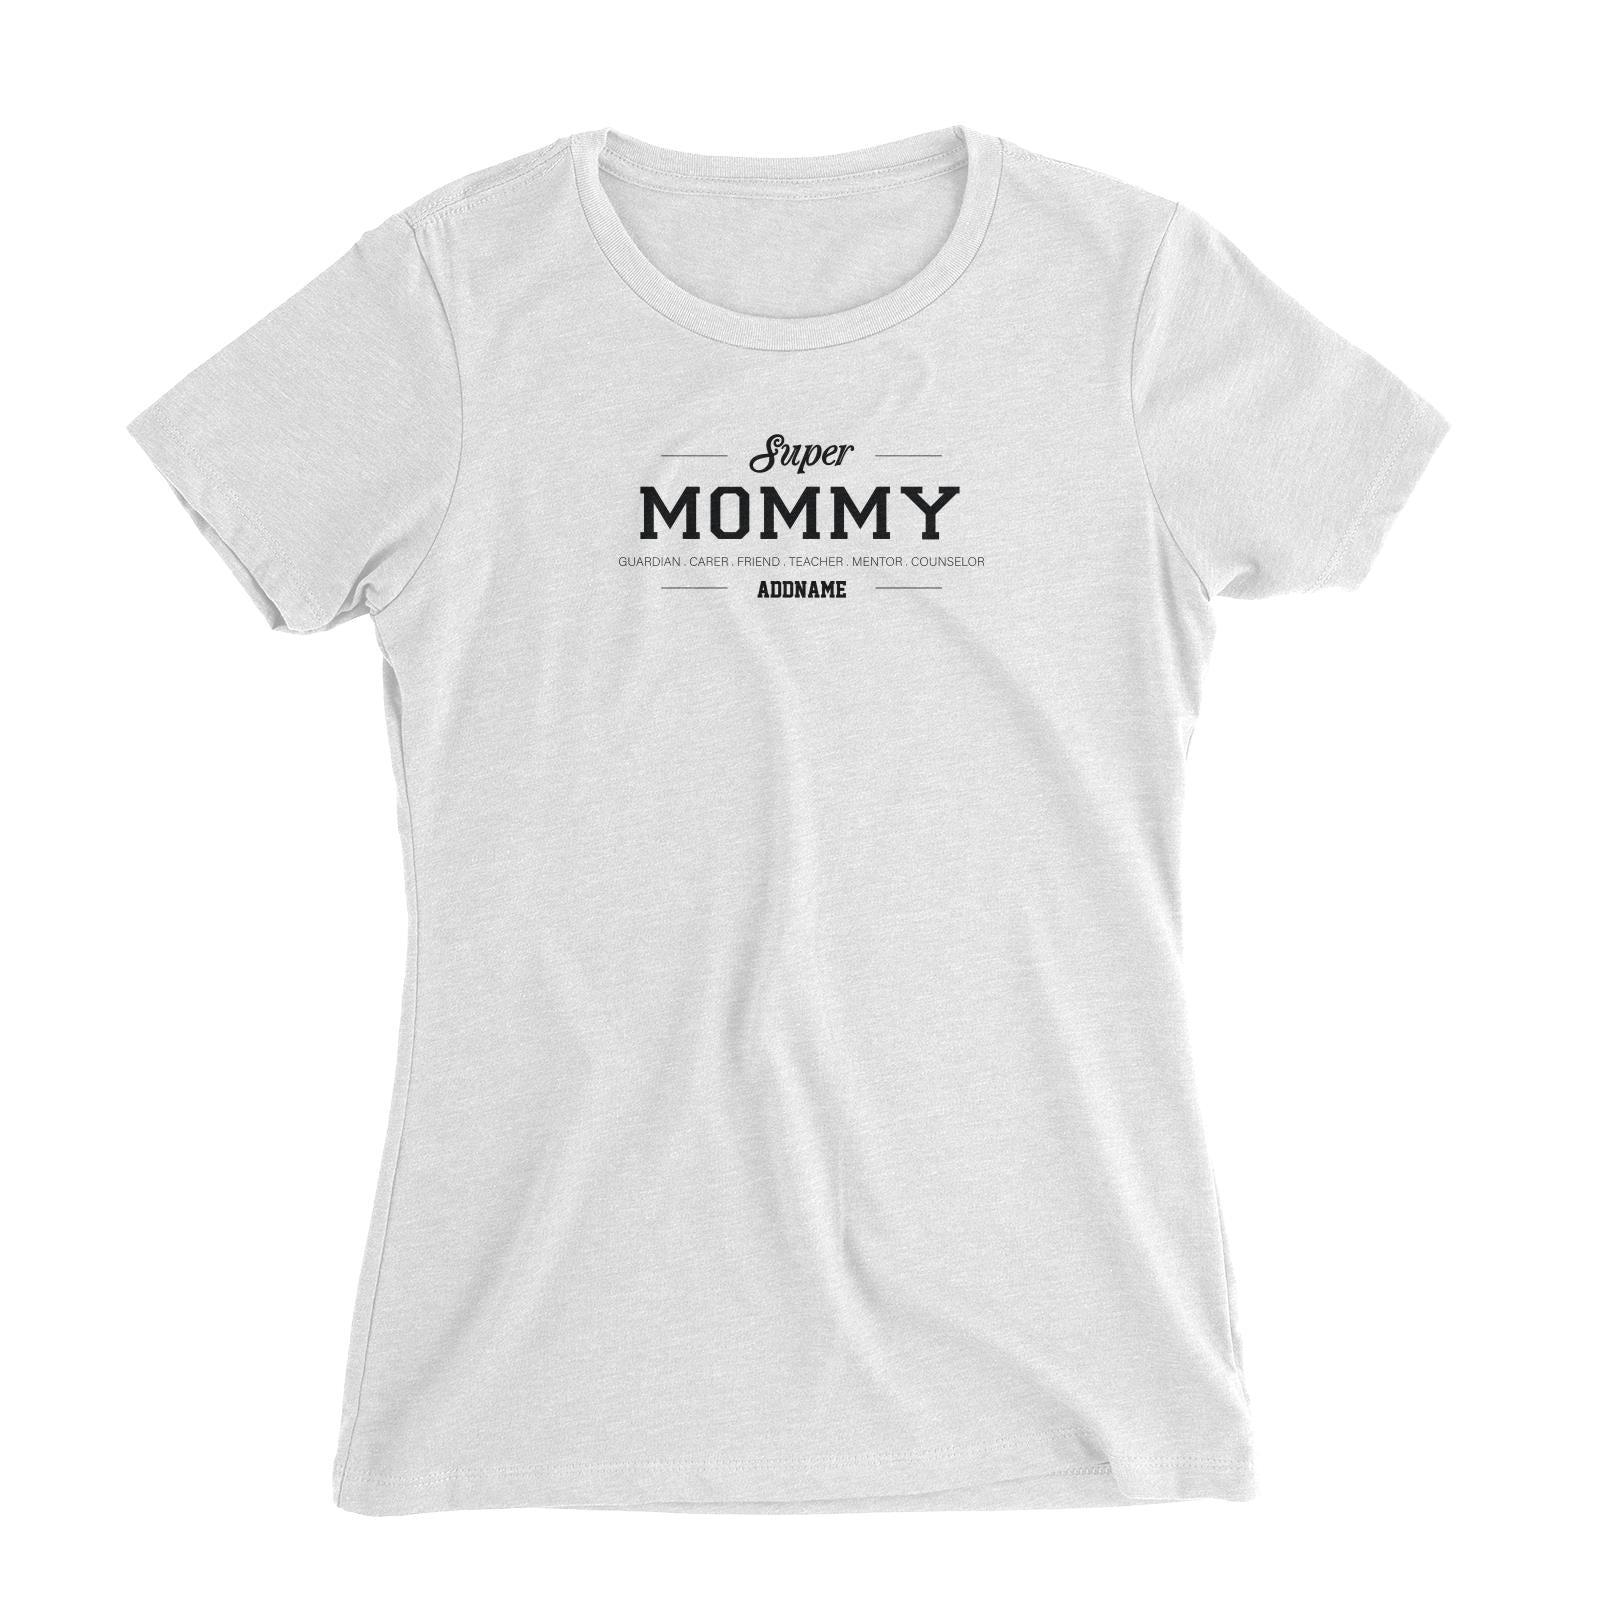 Super Definition Family Super Mommy Addname Women's Slim Fit T-Shirt